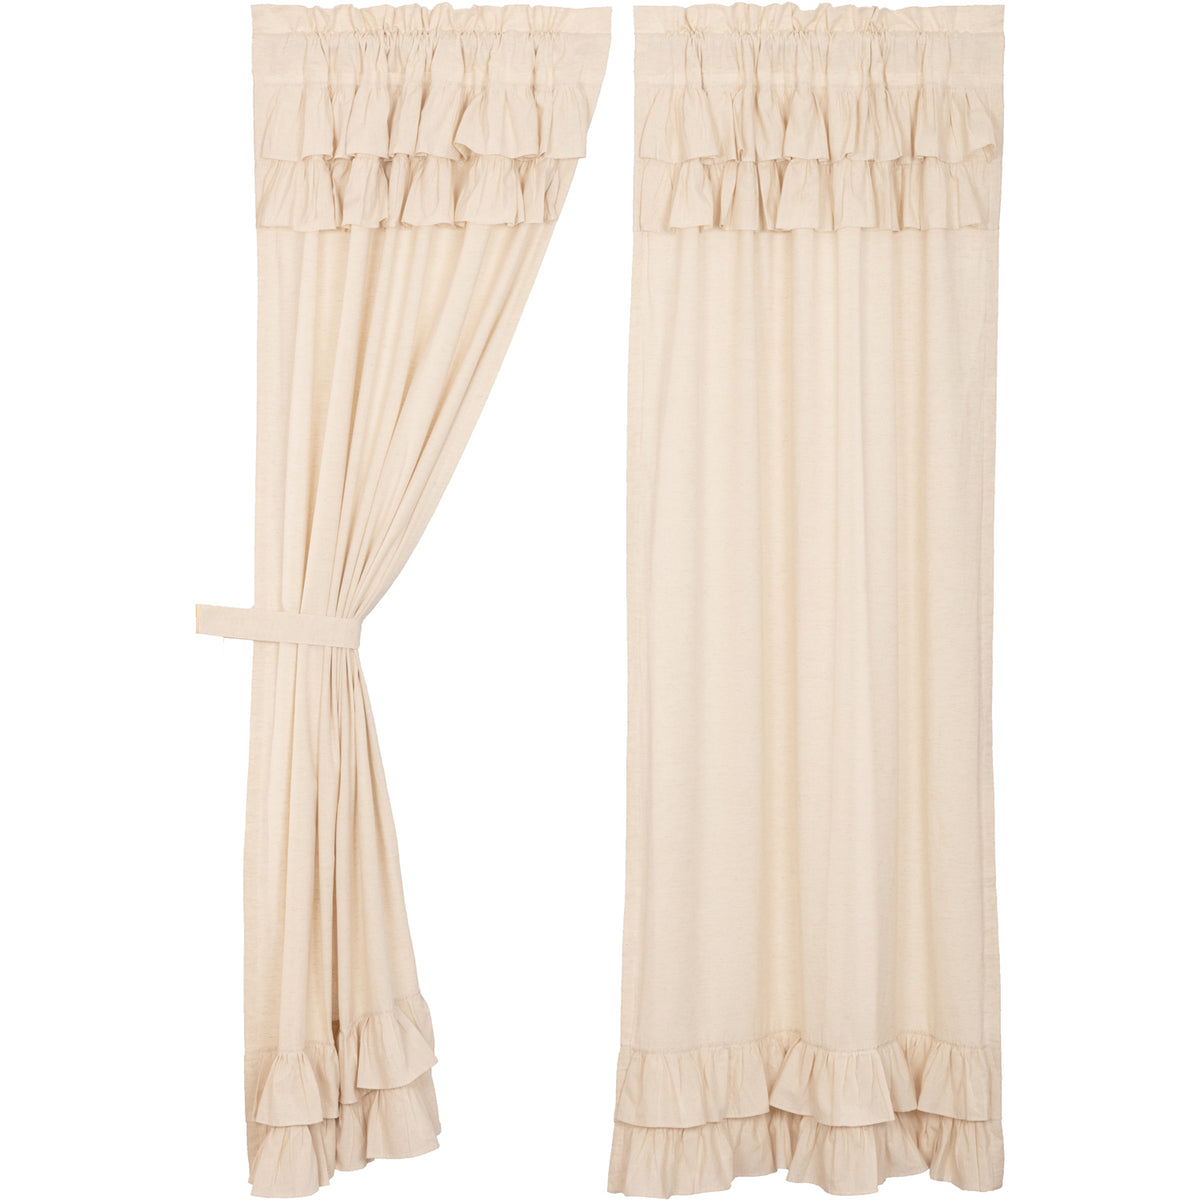 April & Olive Simple Life Flax Natural Ruffled Panel Set of 2 84x40 By VHC Brands